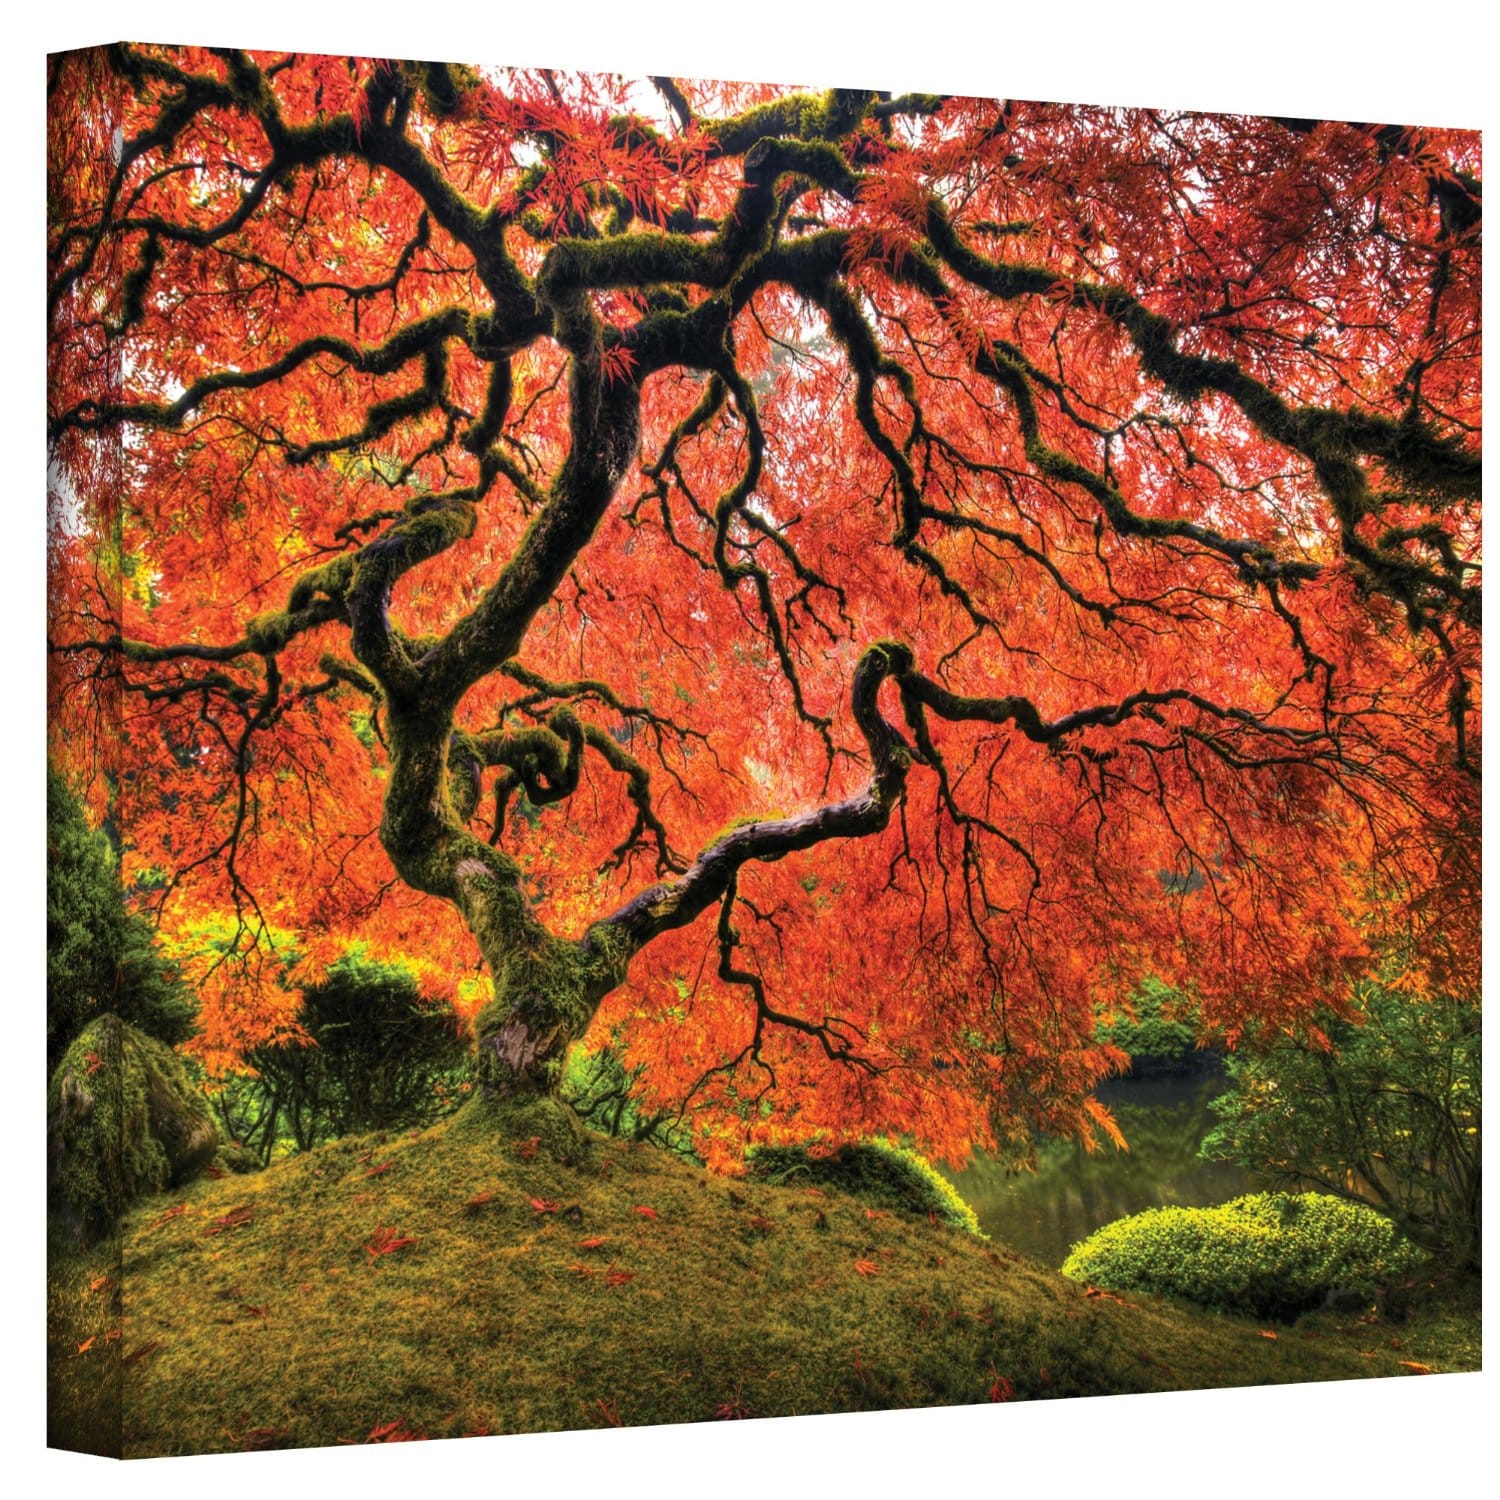 John Black  Japanese Tree  Gallery Wrapped Canvas Today $44.99 Sale